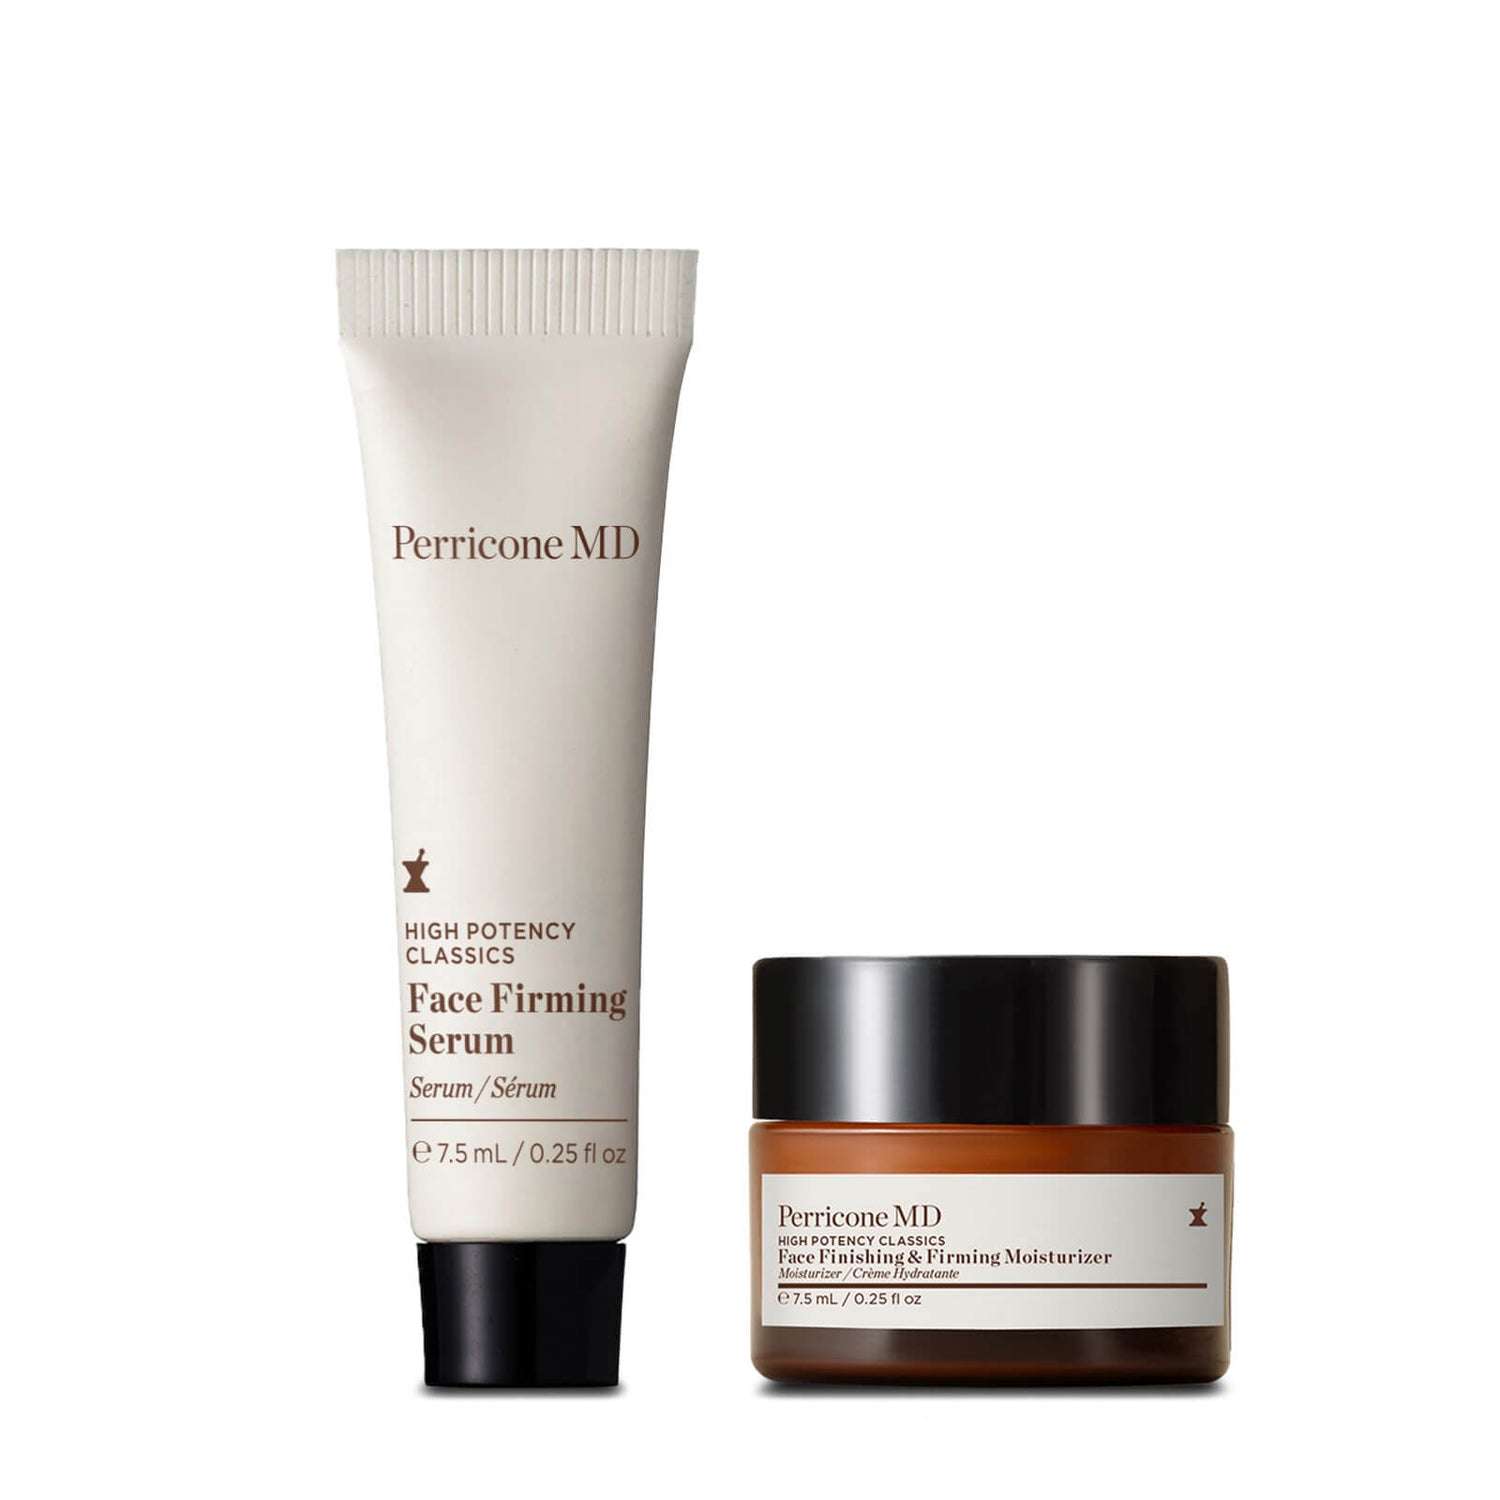 High Potency Classic Firming Deluxe Duo